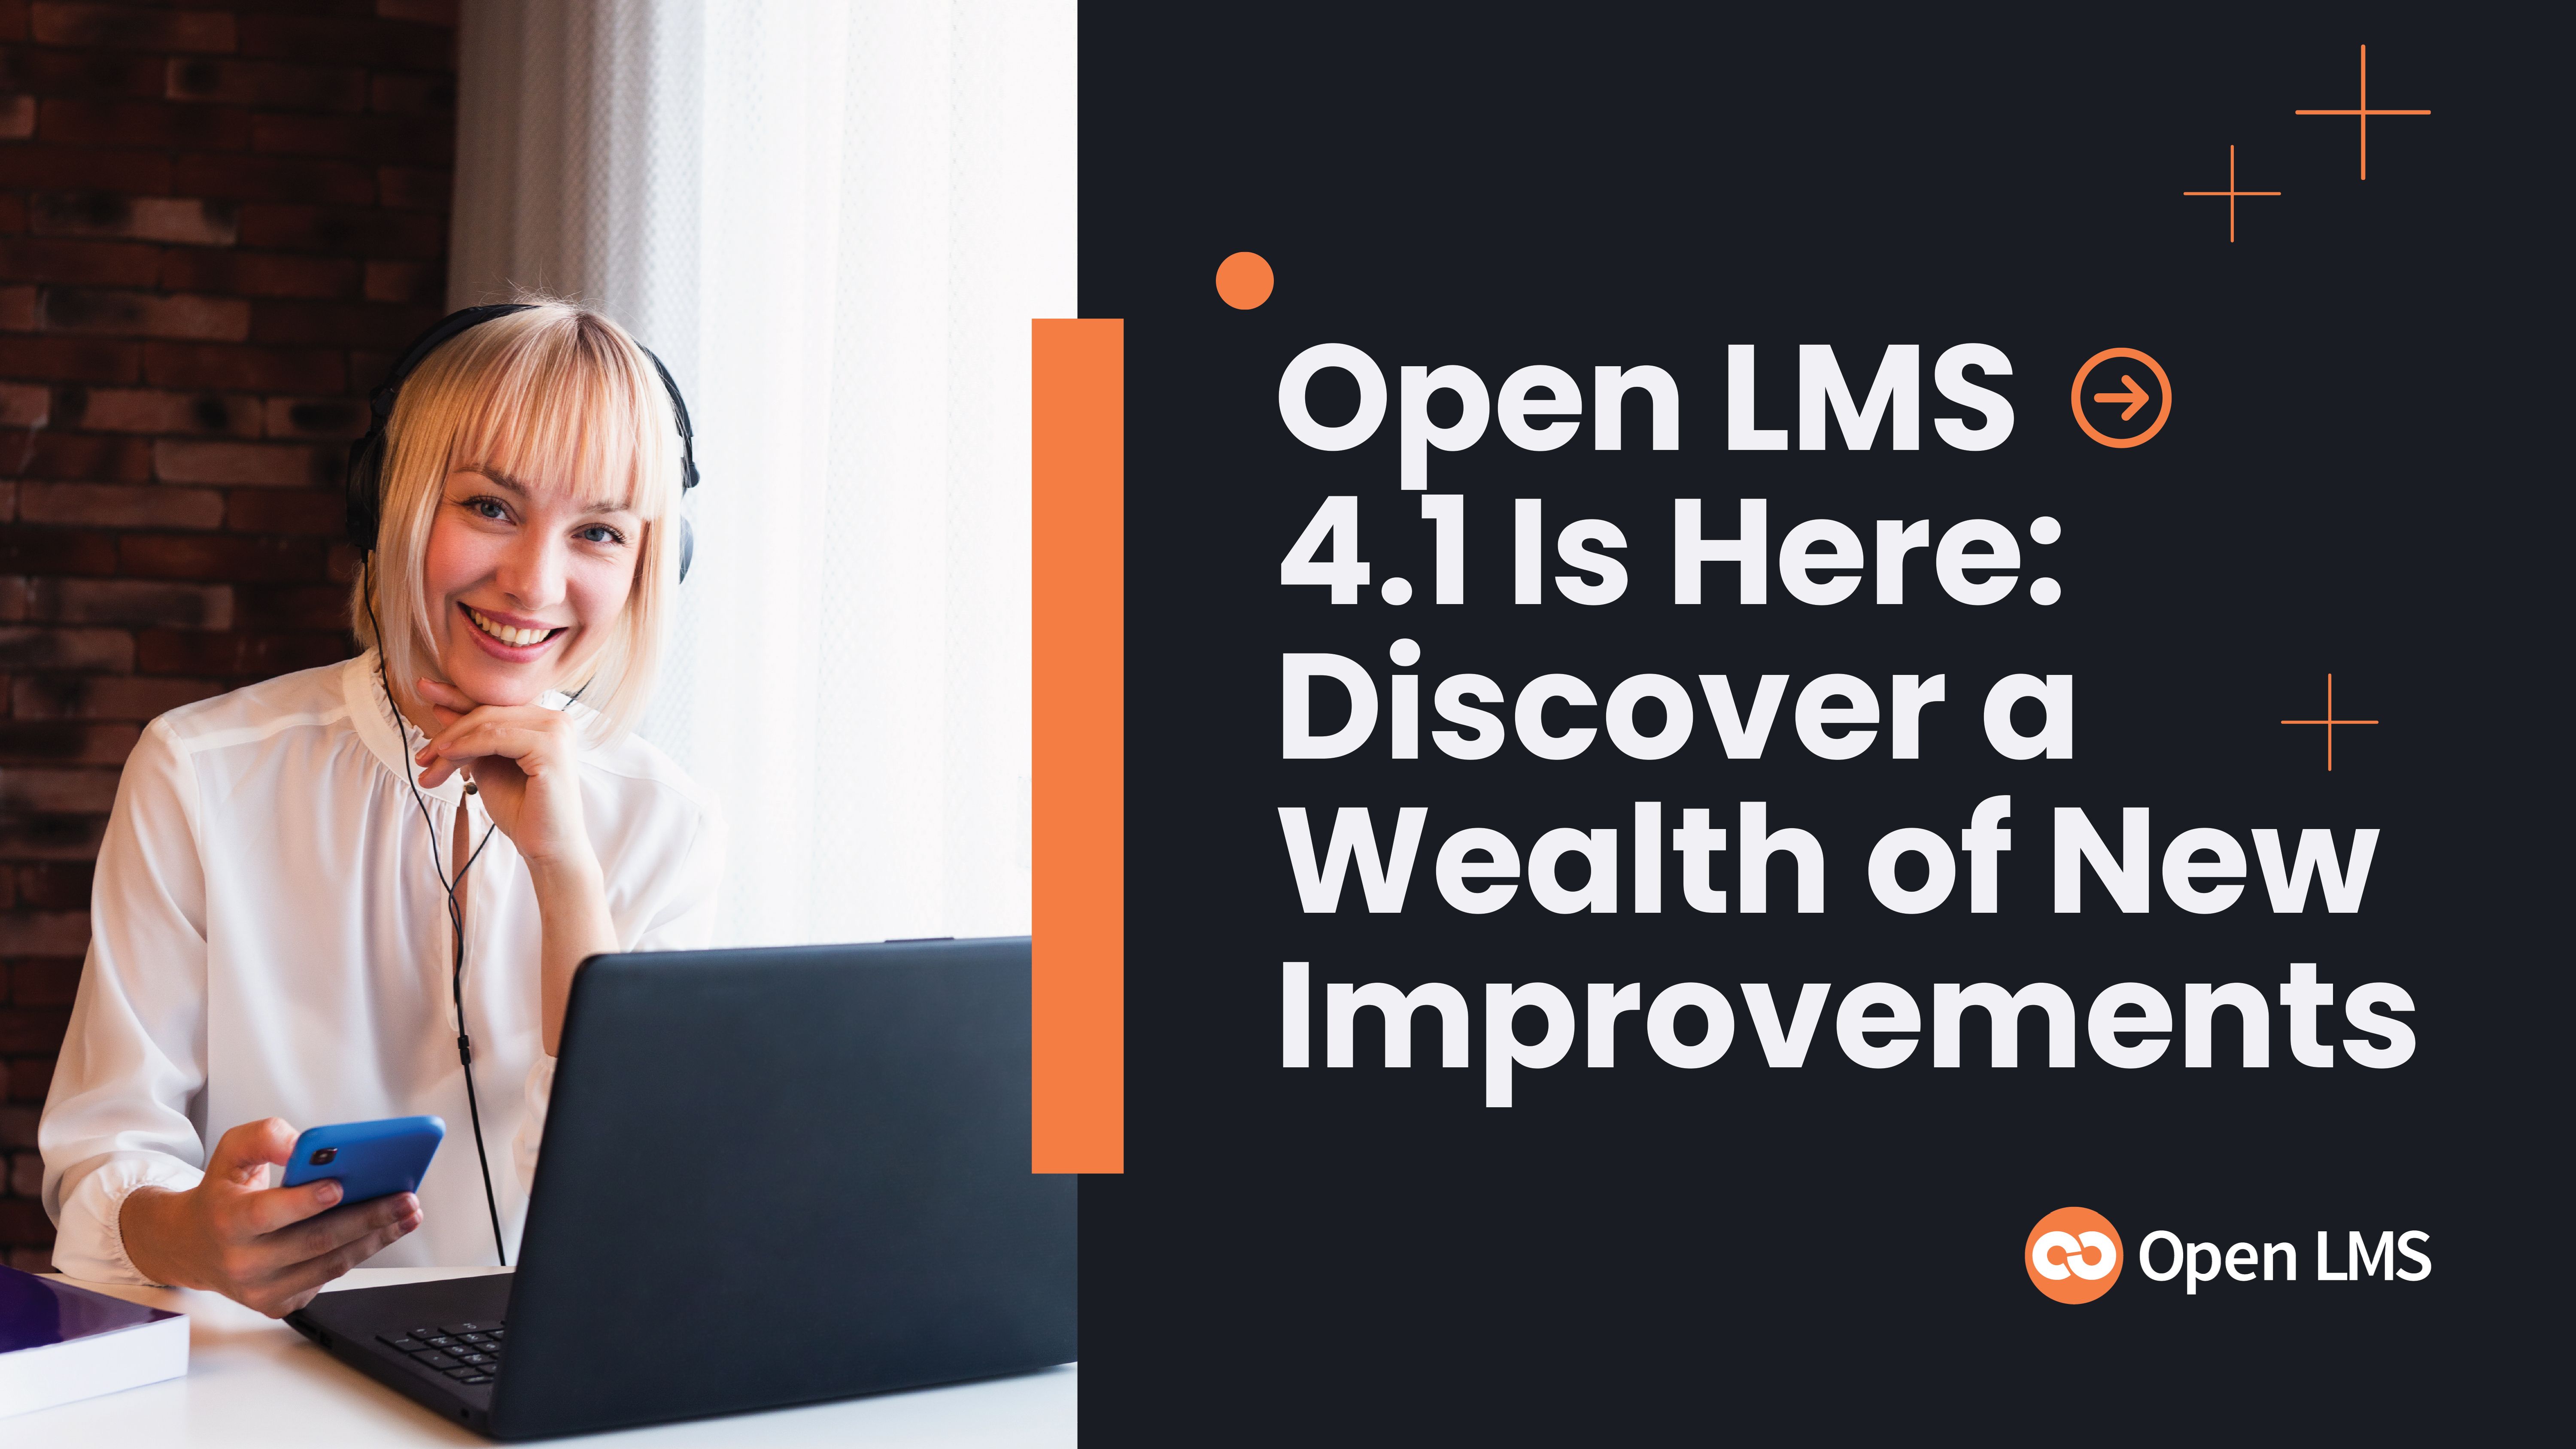 Open LMS 4.1 Is Here: Discover a Wealth of New Improvements